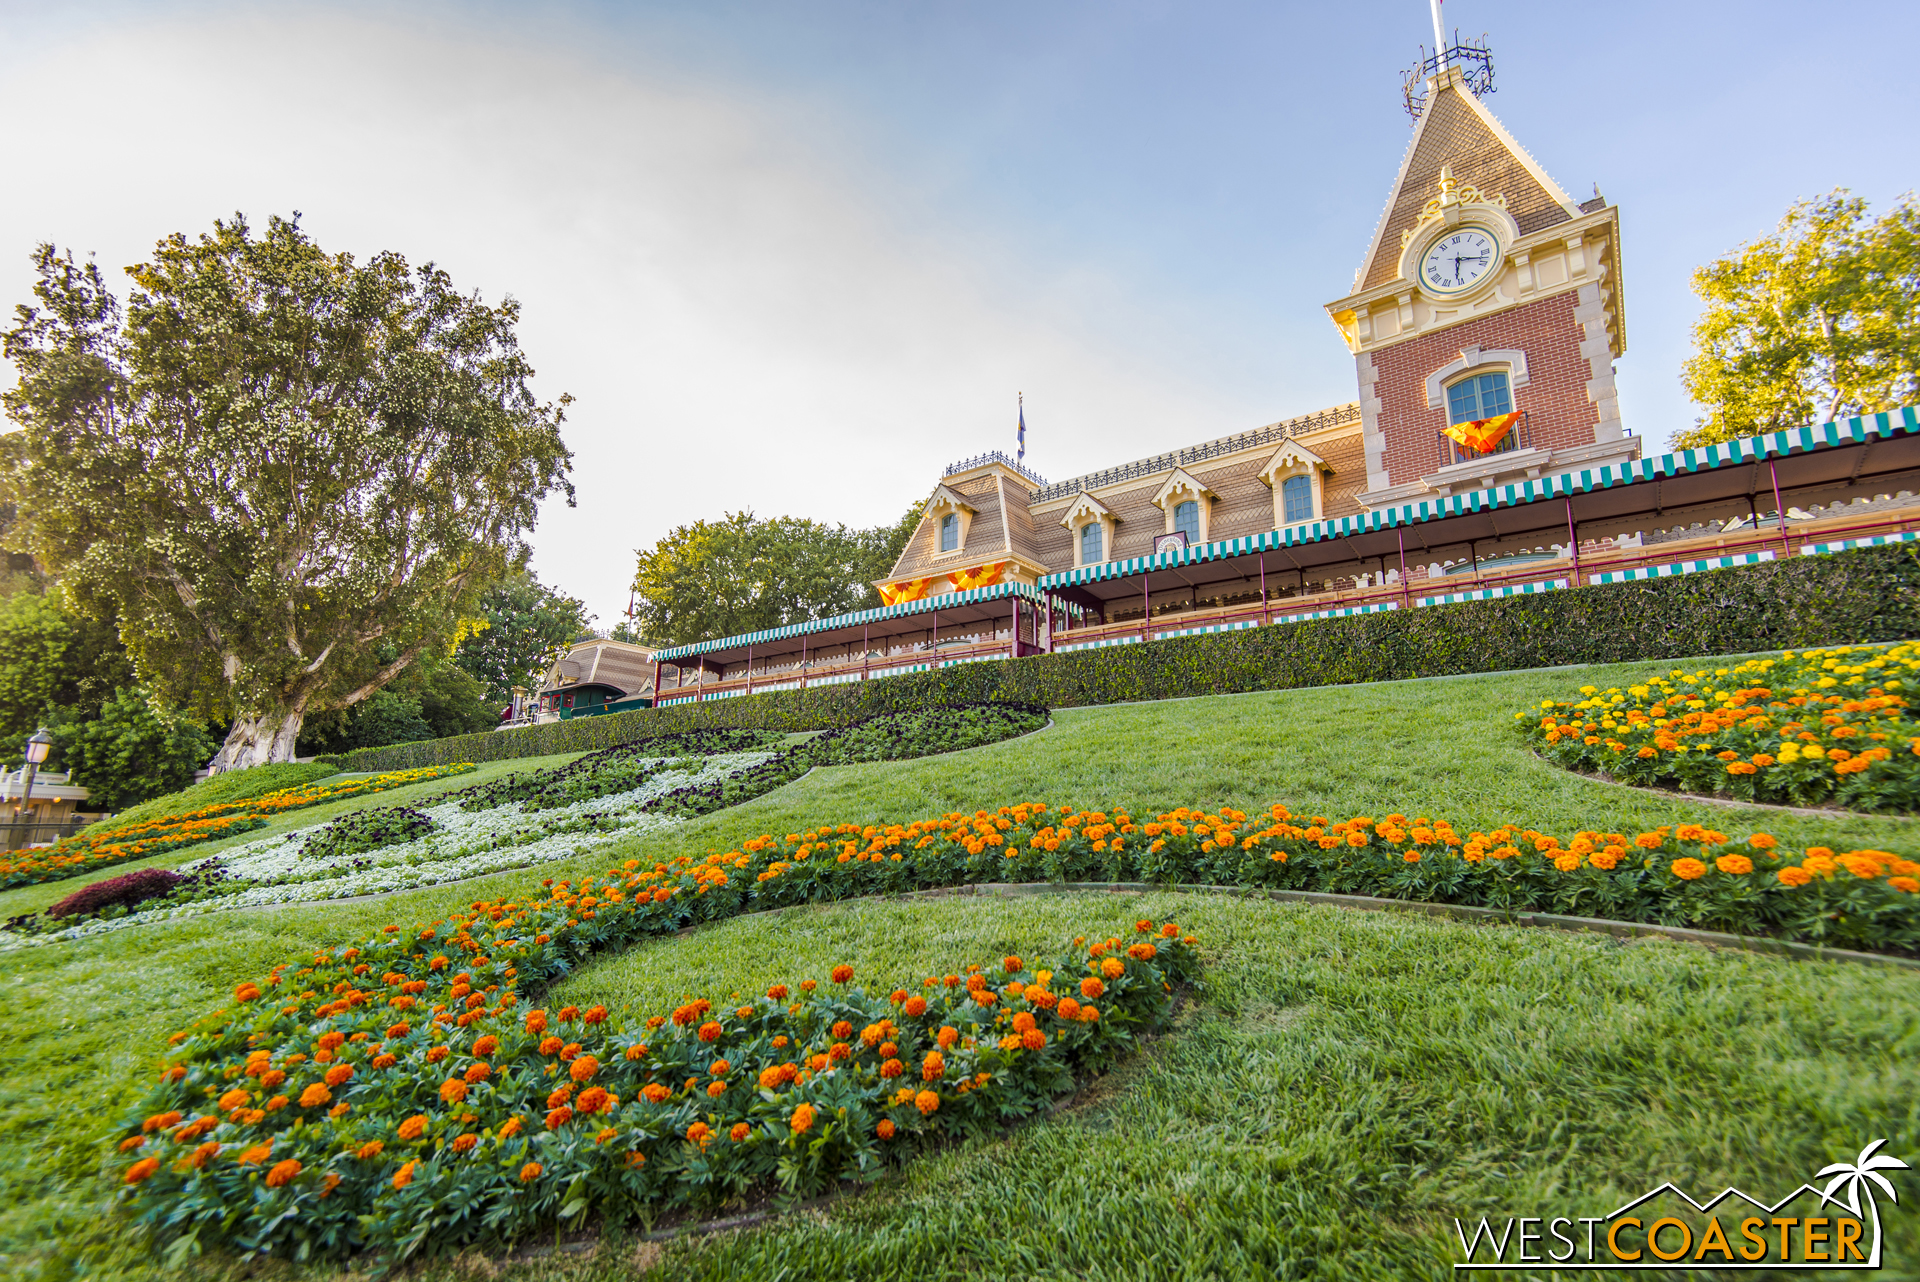  Inside, the giant "diamond" and the 60th Anniversary signage are gone, replaced by fall colors and florals. 